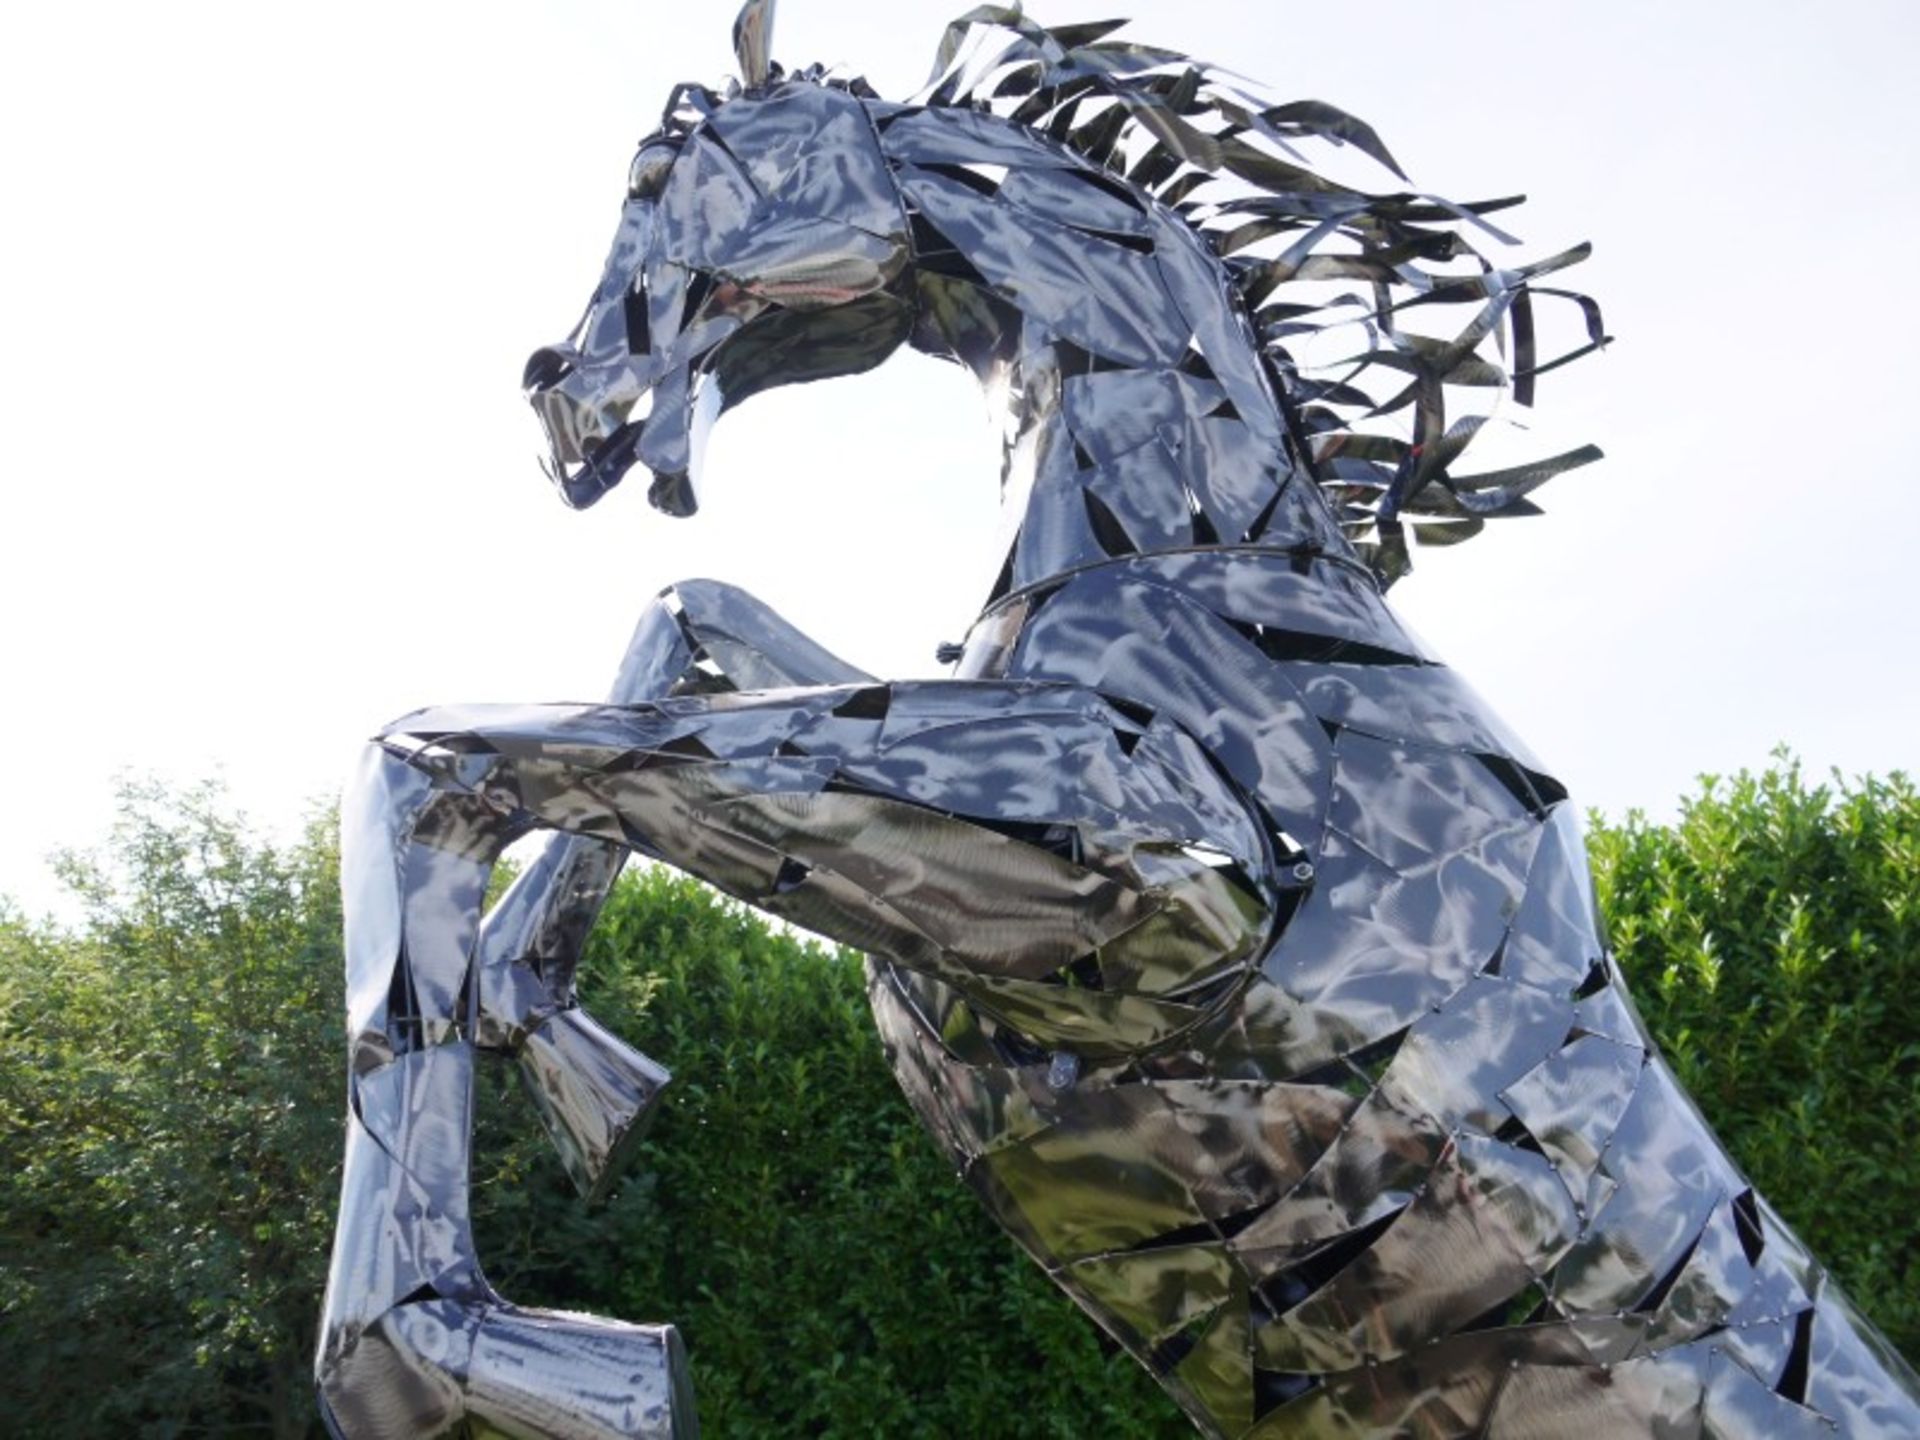 HUGE REARING HORSE STATUE 11FT HIGH - Image 5 of 5